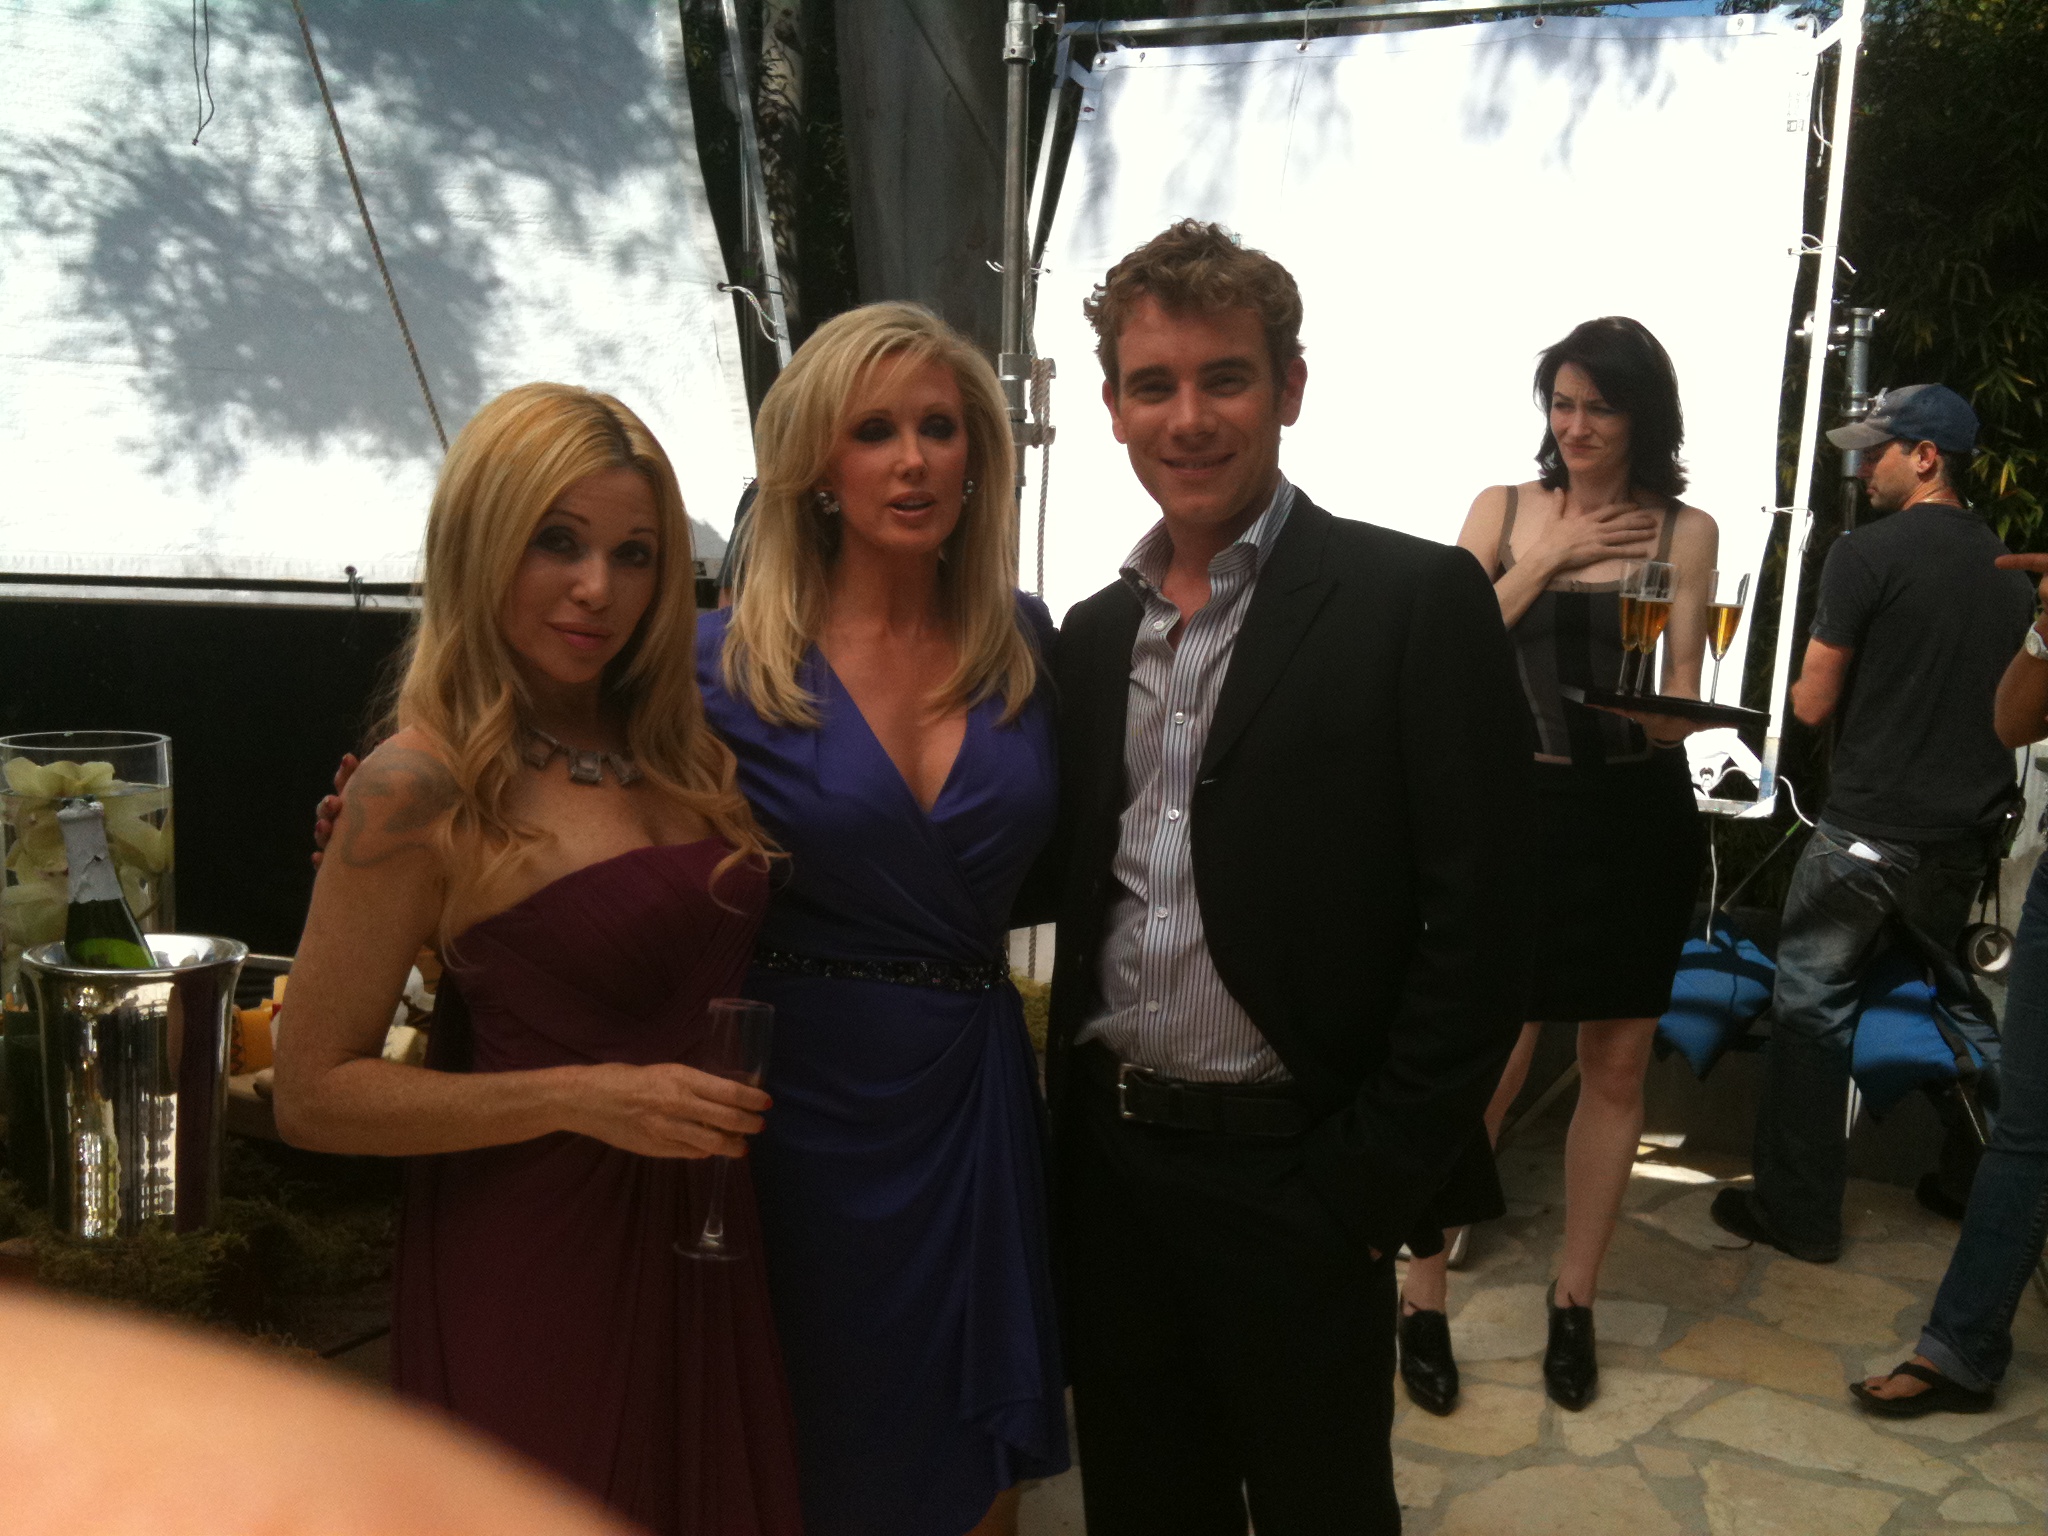 Eg on set of Boy toy with Morgan fairchilds